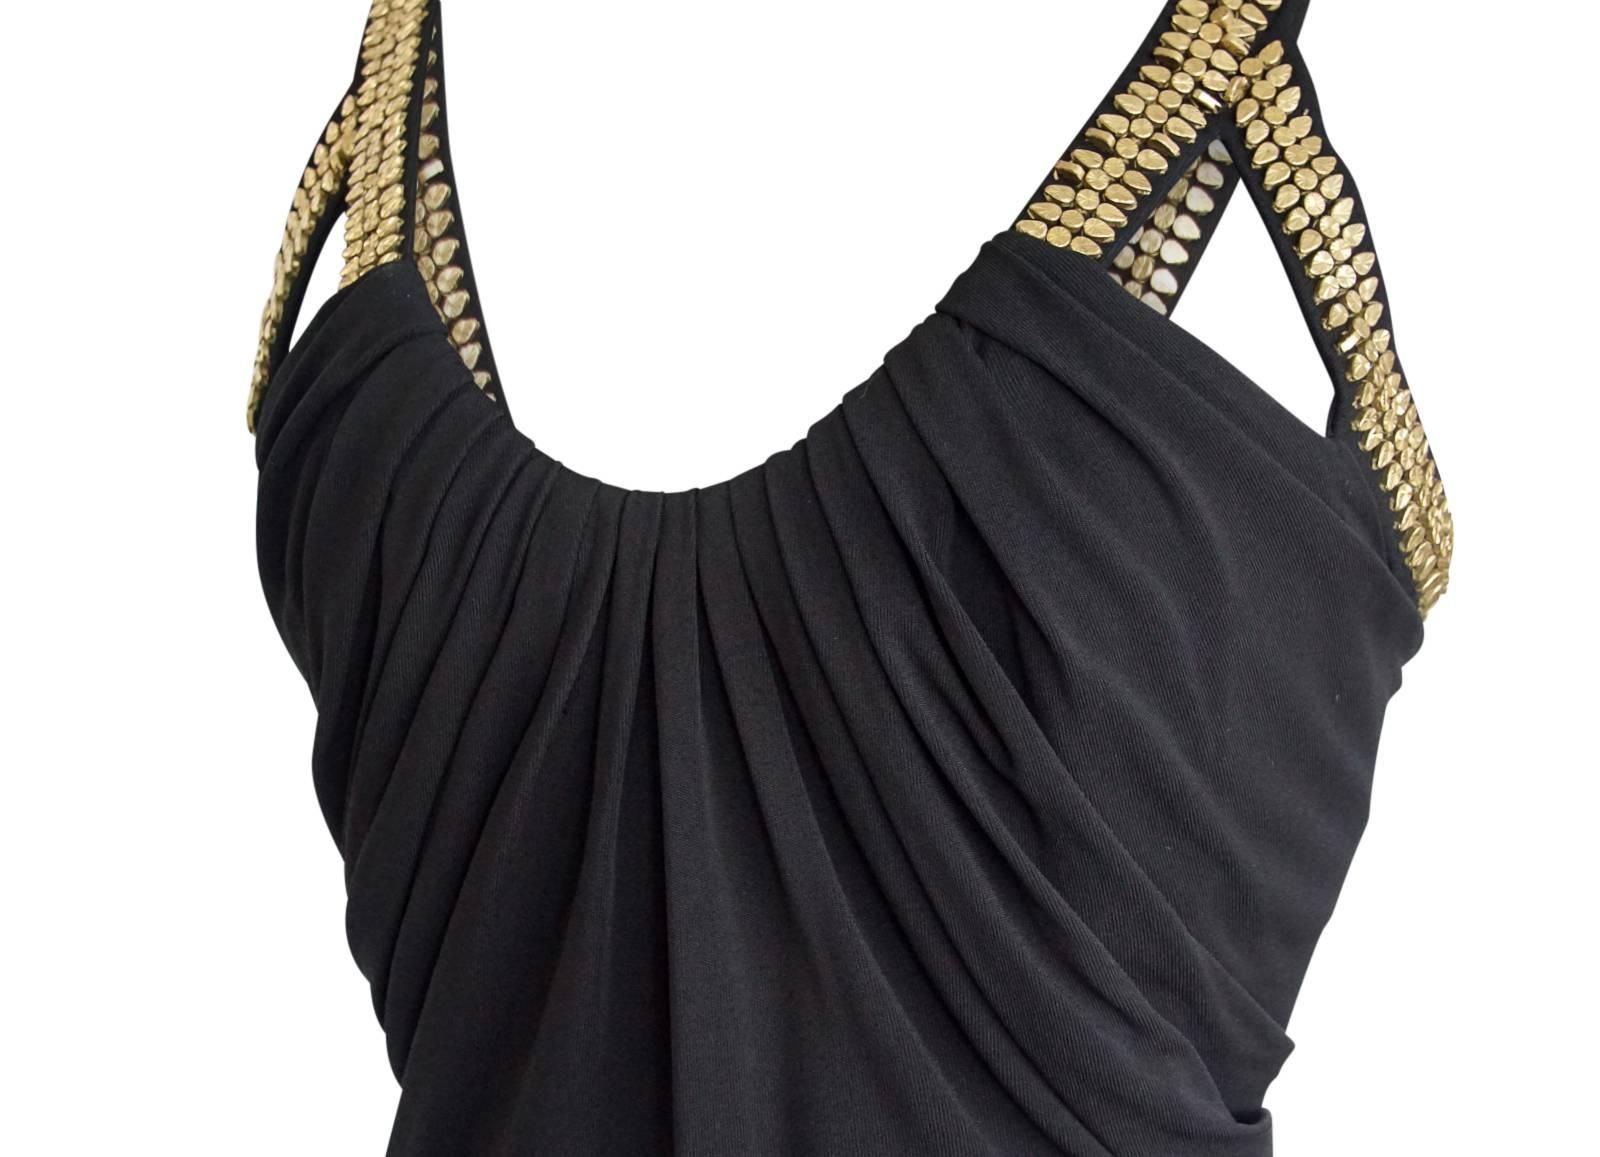 Versace Dress Gold Hardware Black pleated and Rouched  40 / 4 1